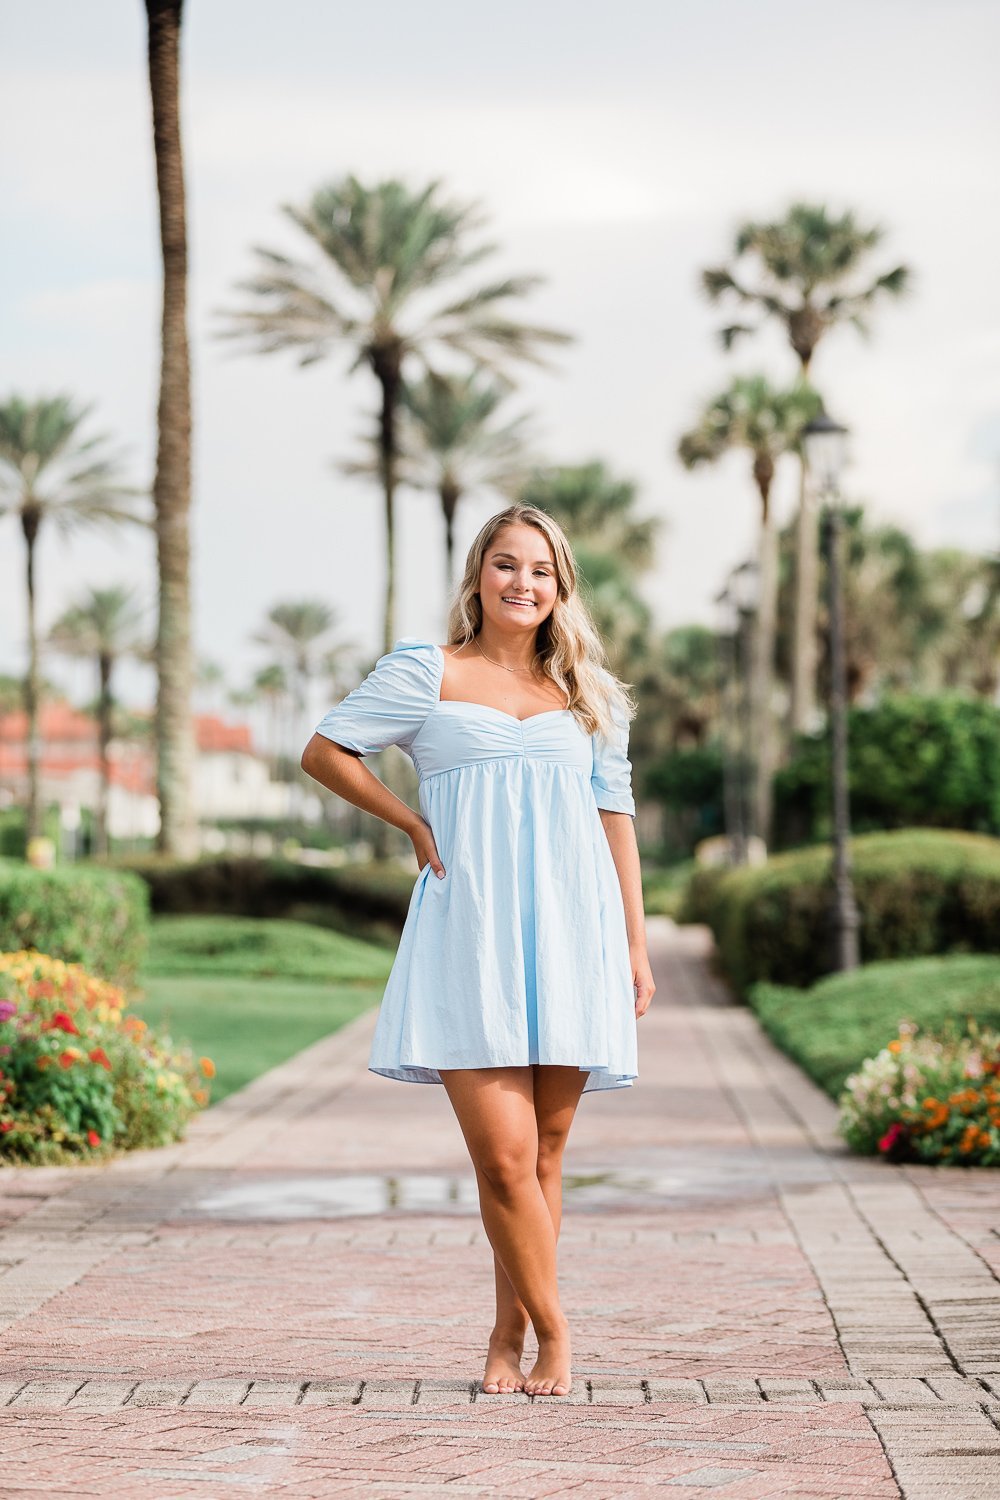 Senior pictures in Ponte Vedra with palm trees in the background - posing inspiration 